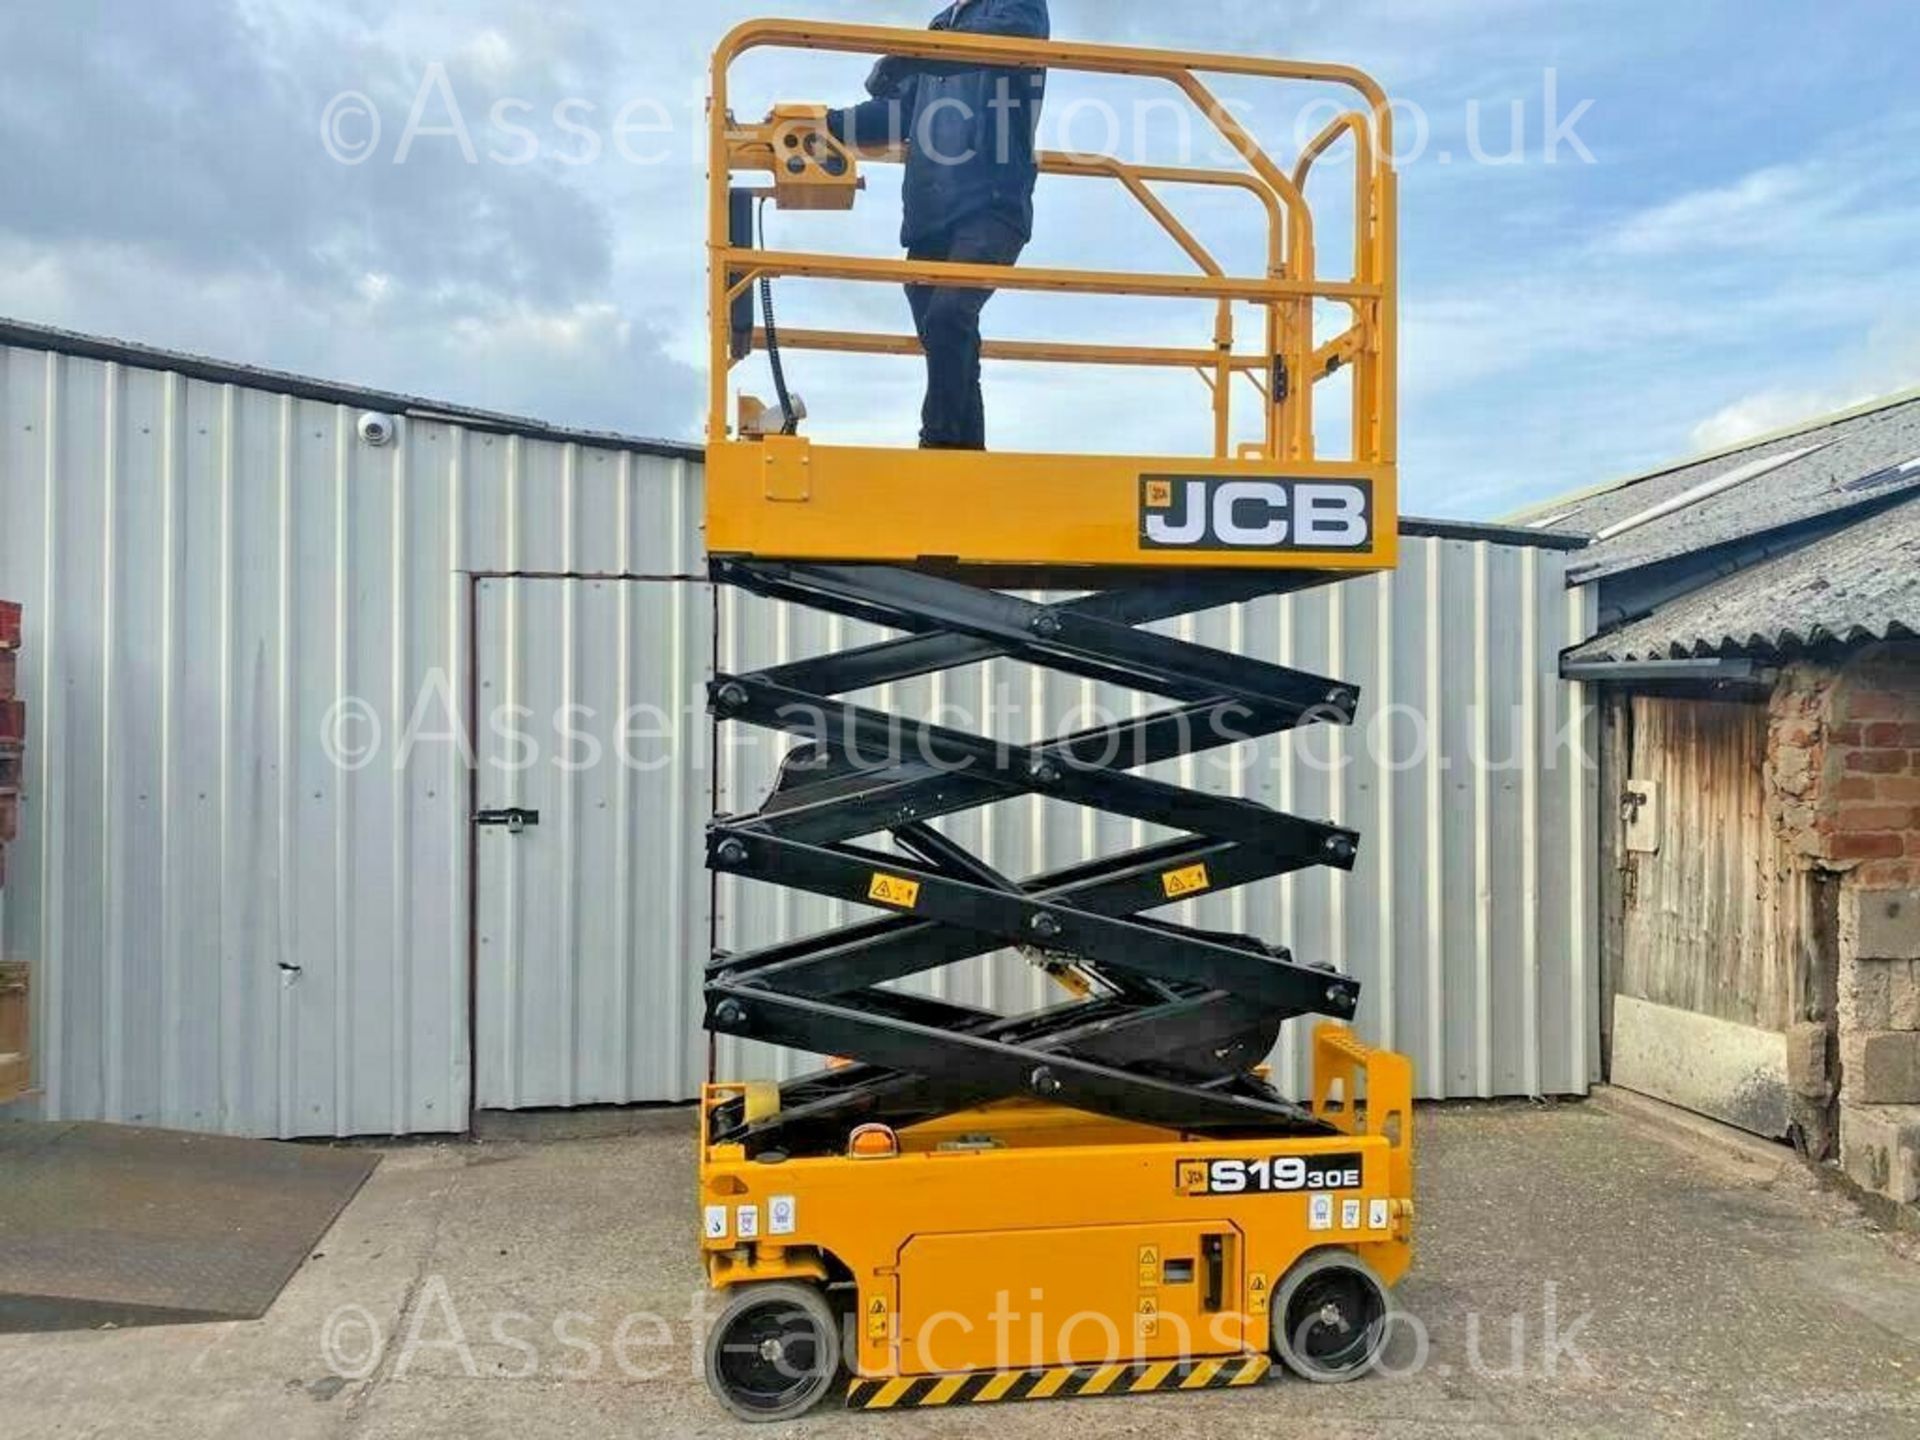 SCISSOR LIFT JCB S1930E ELECTRIC, PLATFORM HEIGHT 5.8m/ 19ft, ONLY 98.4 HOURS, YEAR 2018 *PLUS VAT* - Image 5 of 14